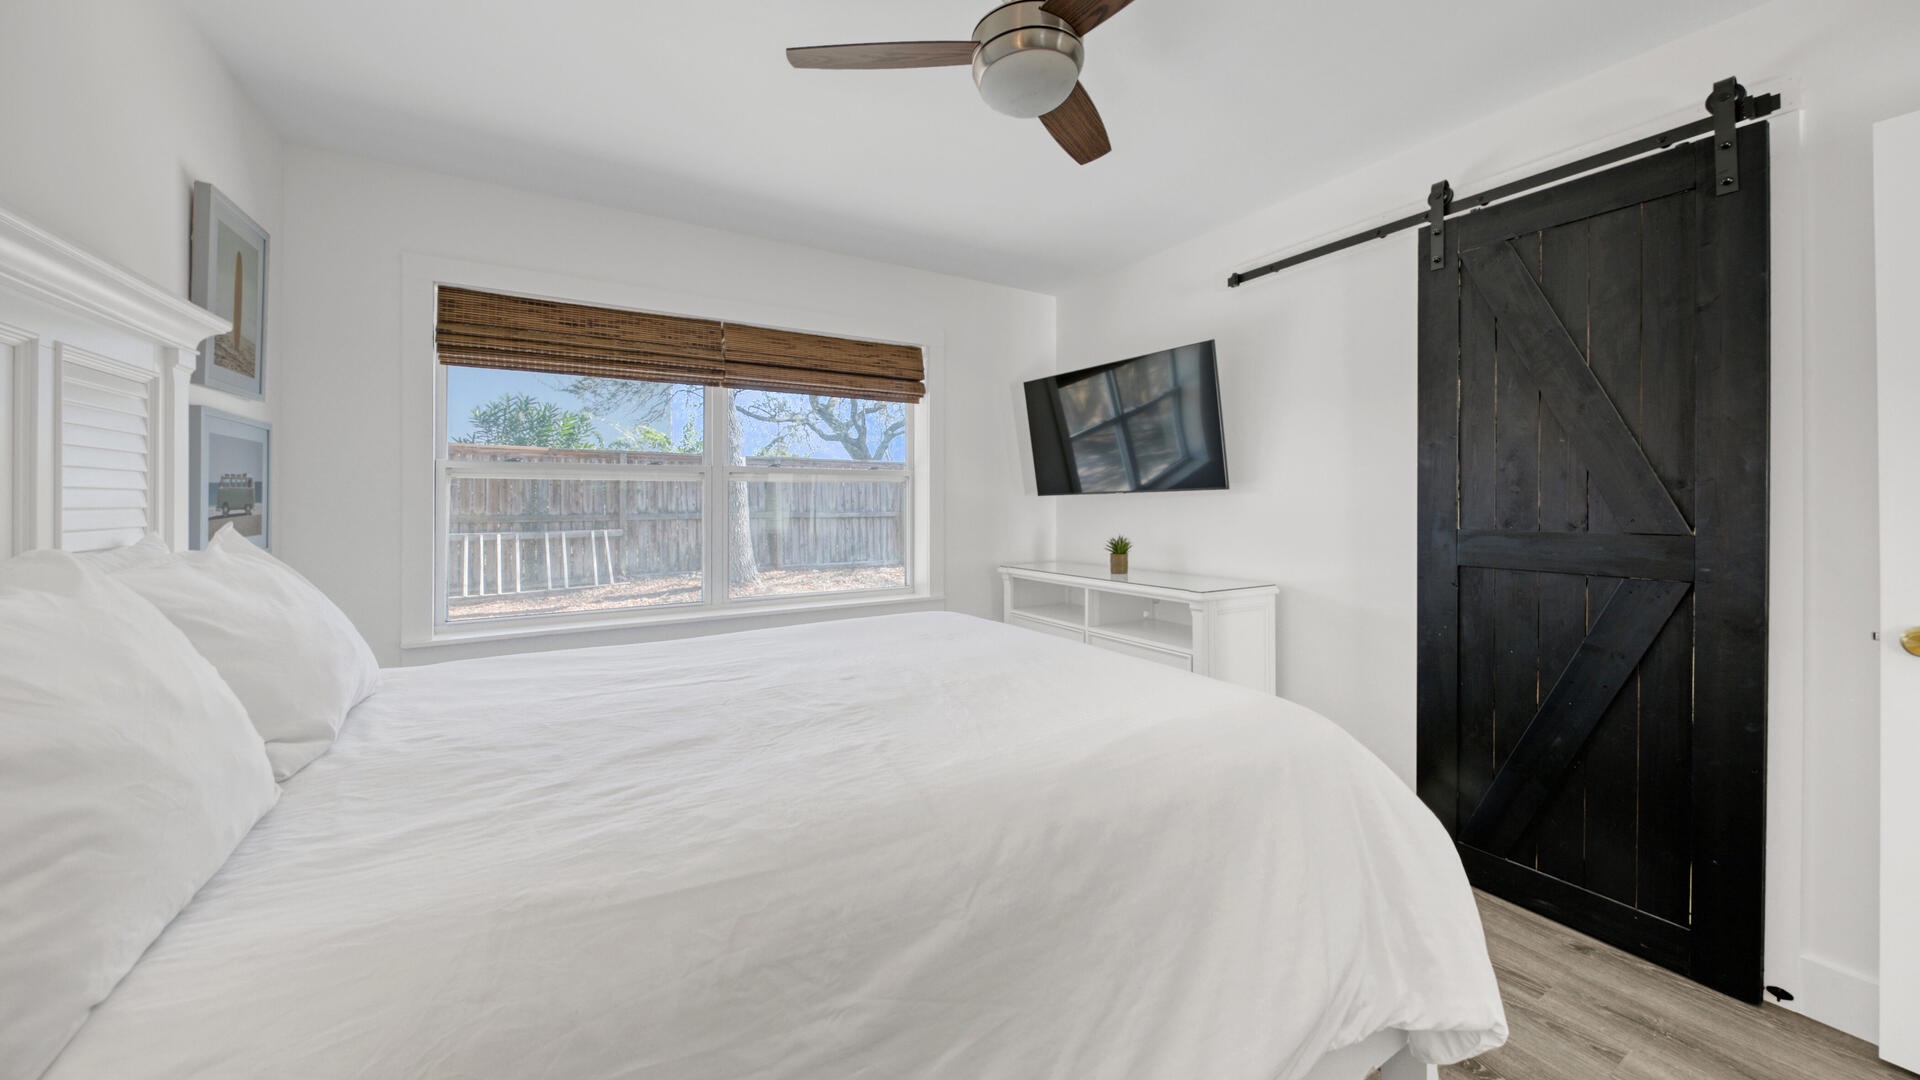 The 2nd bedroom offers a queen size bed and walk-in closet!